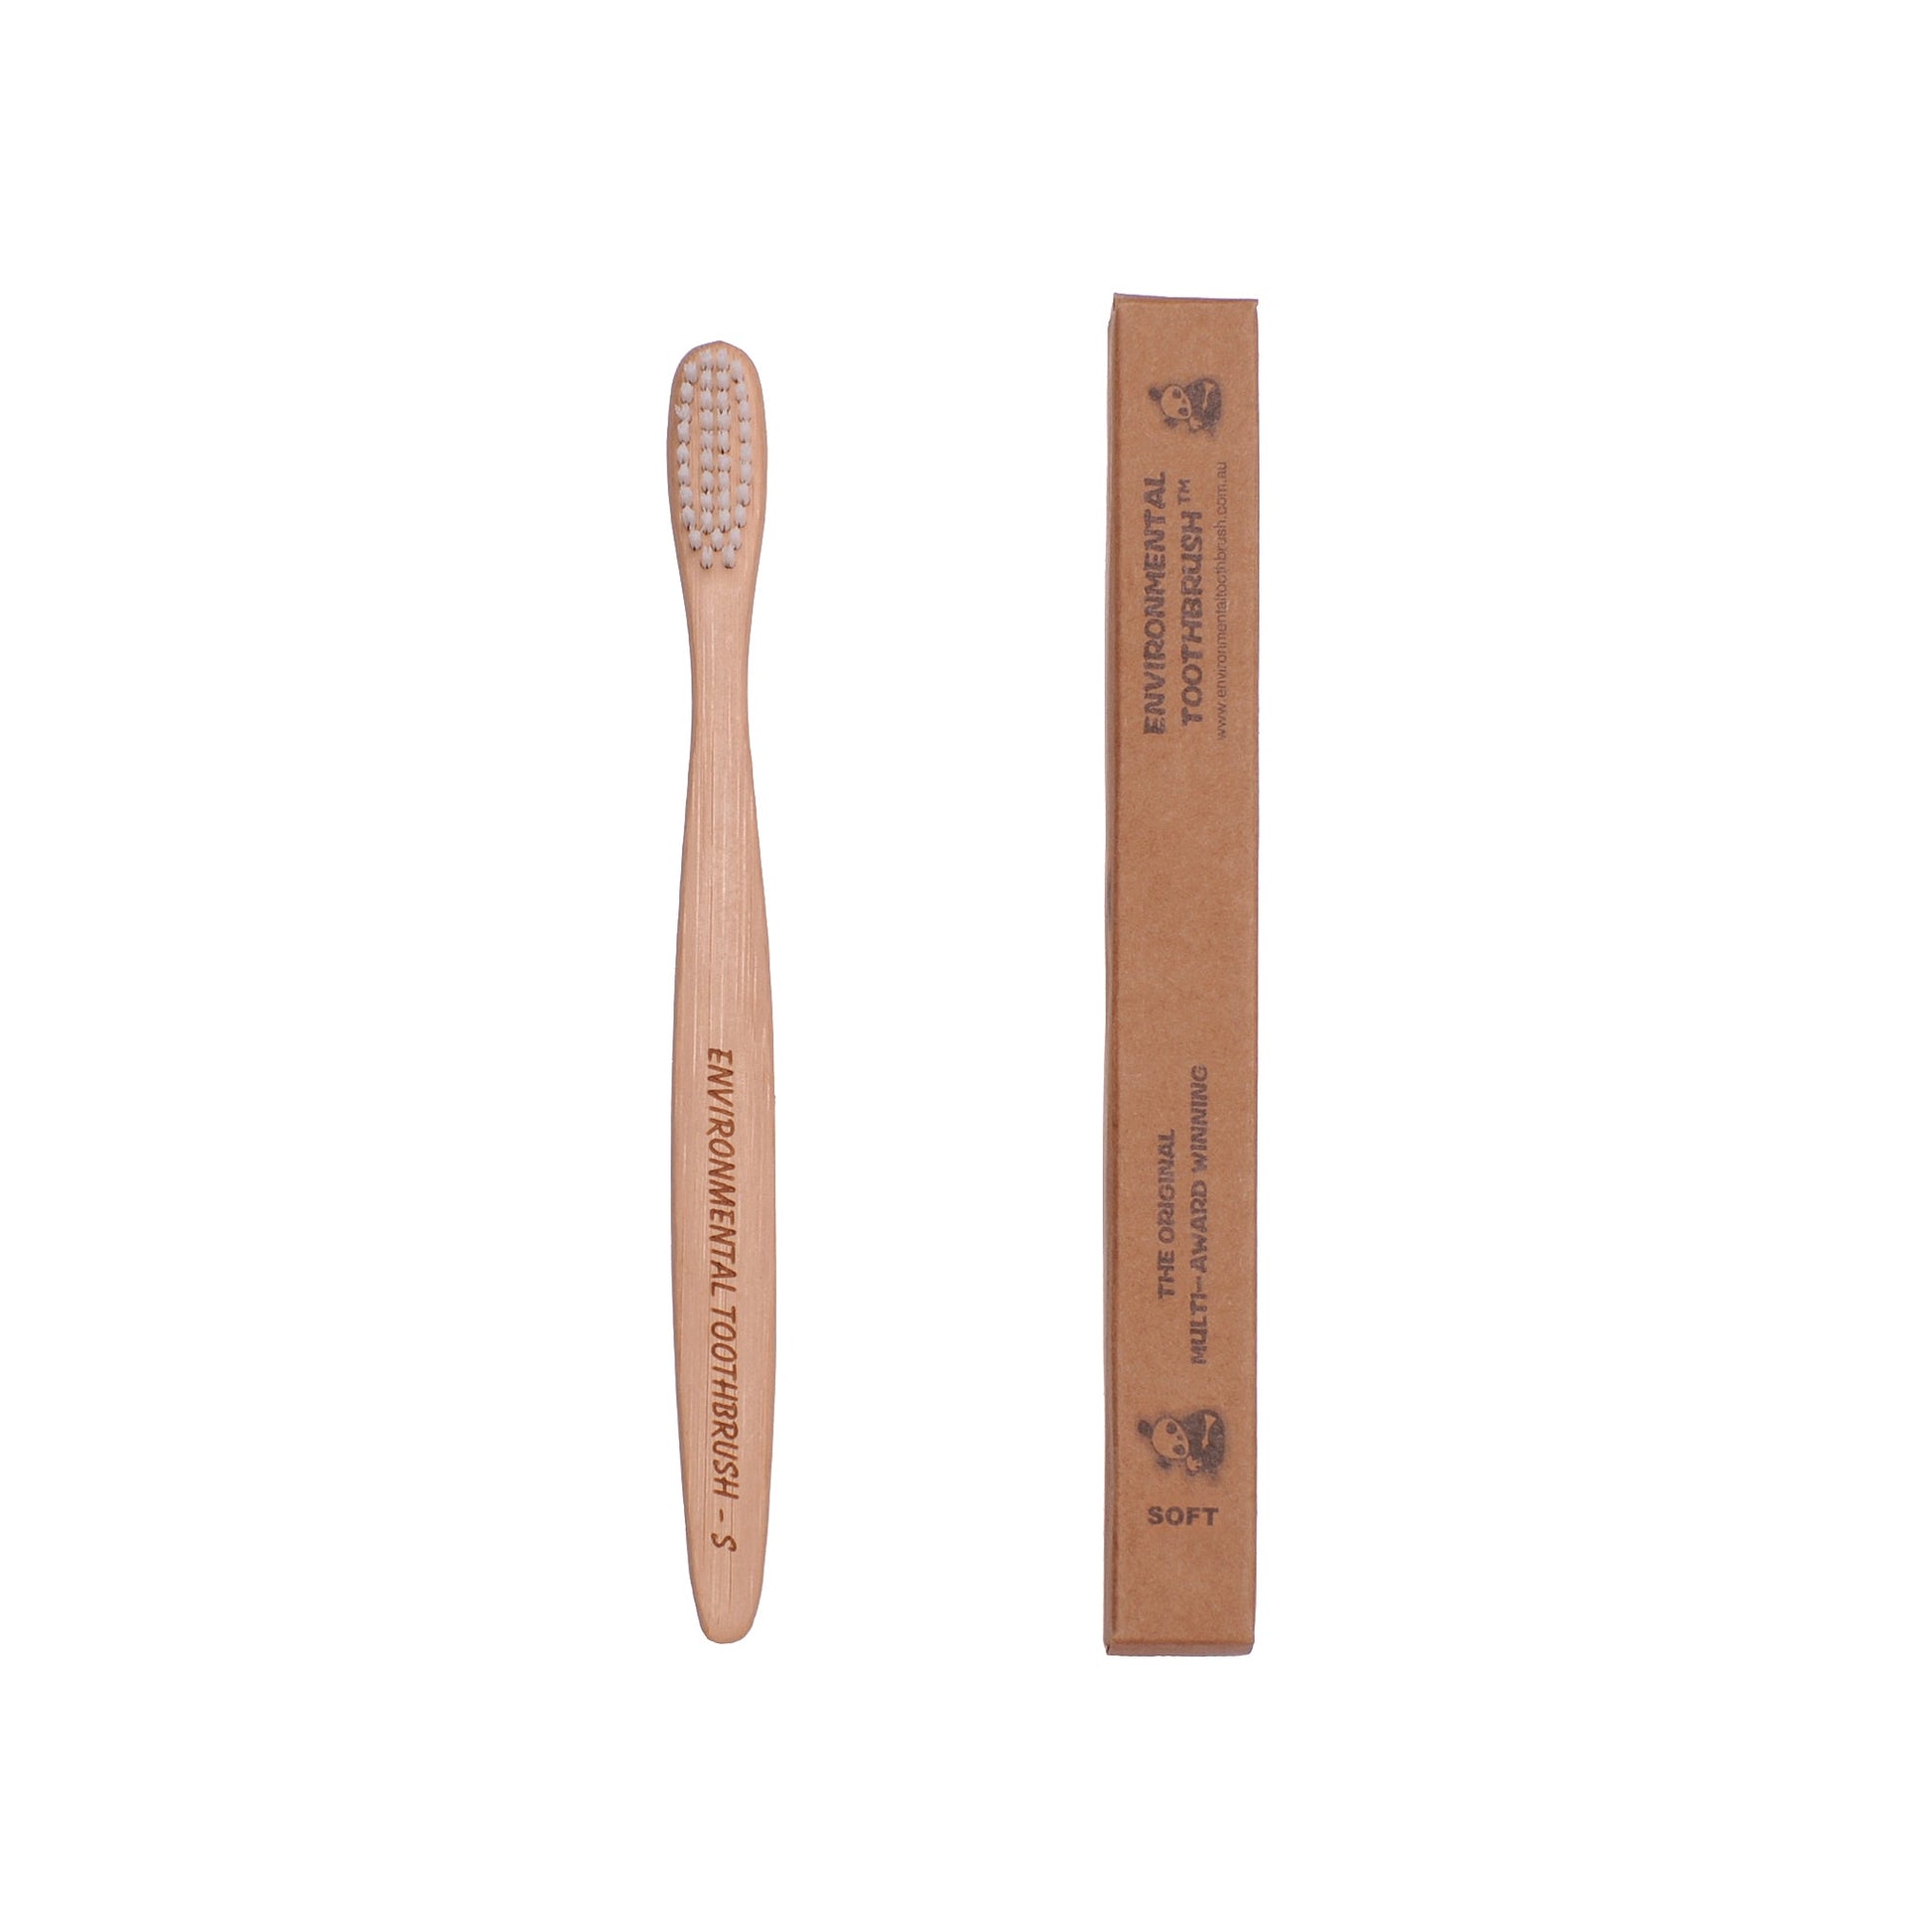 Toothbrush - Bamboo - Eco Patch